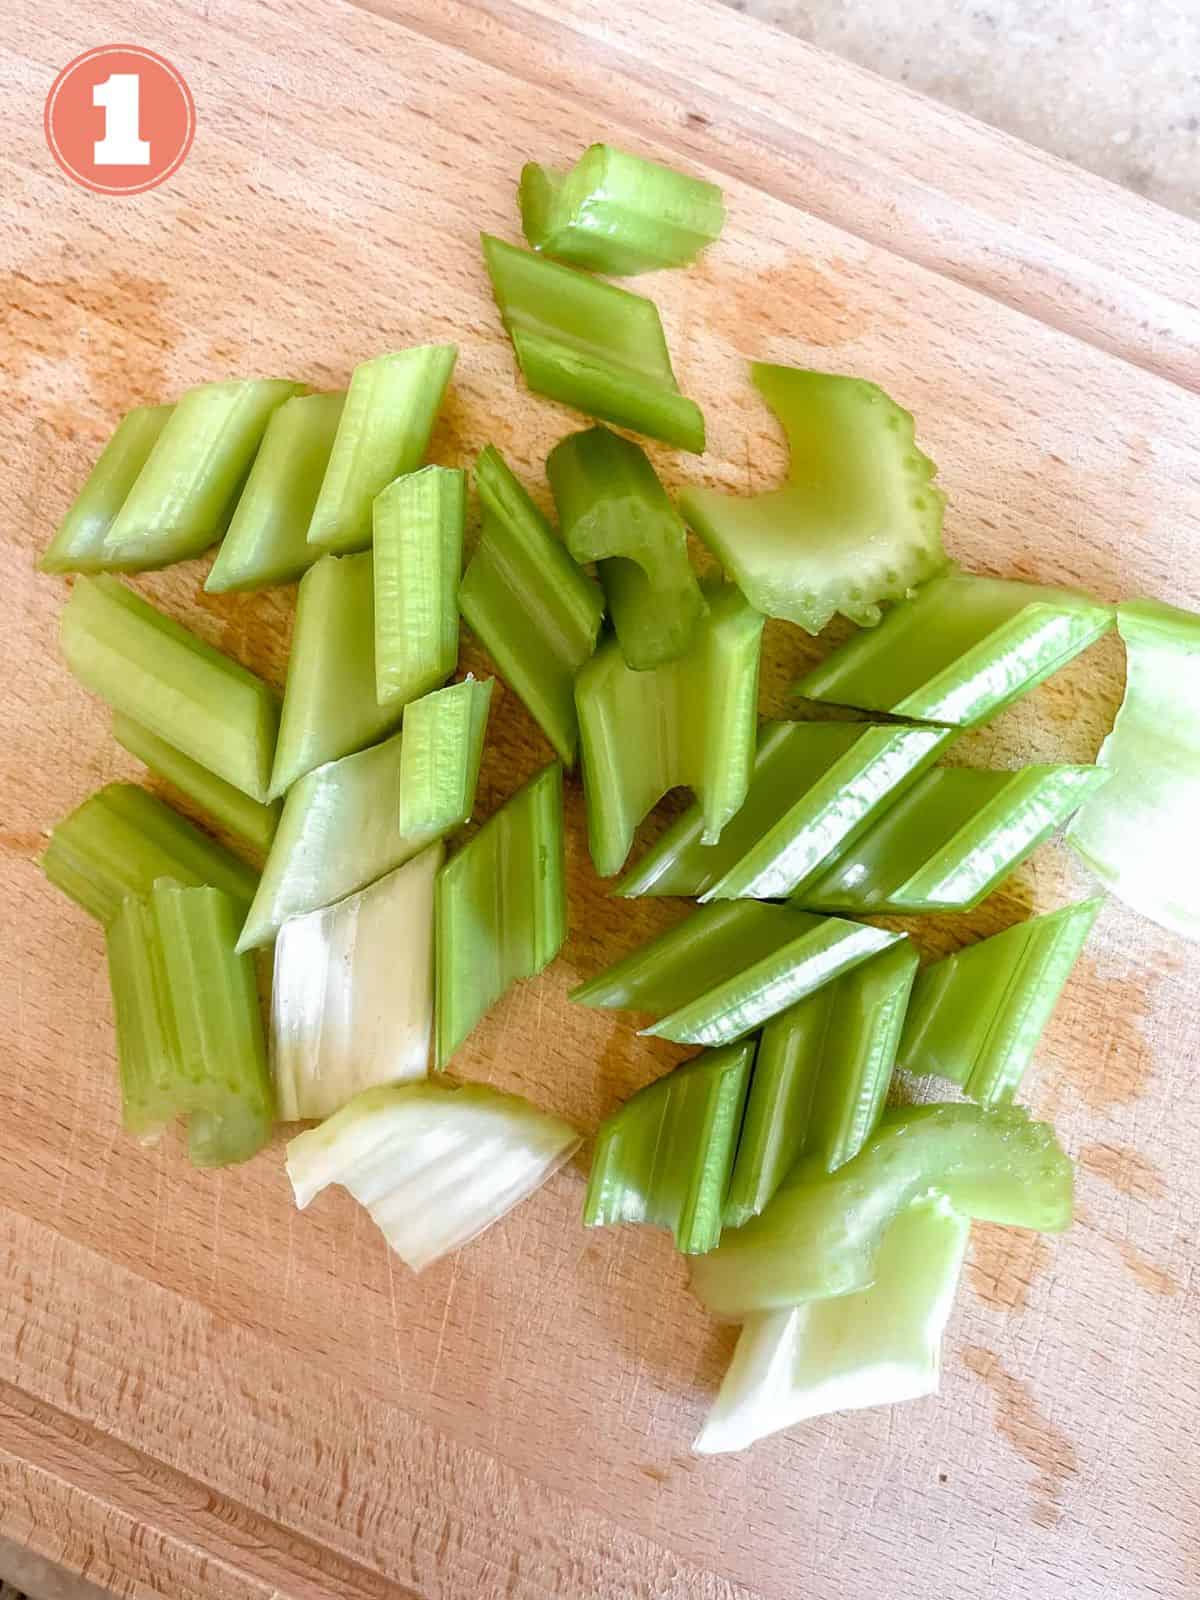 diced celery on a wooden chopping board labelled number one.